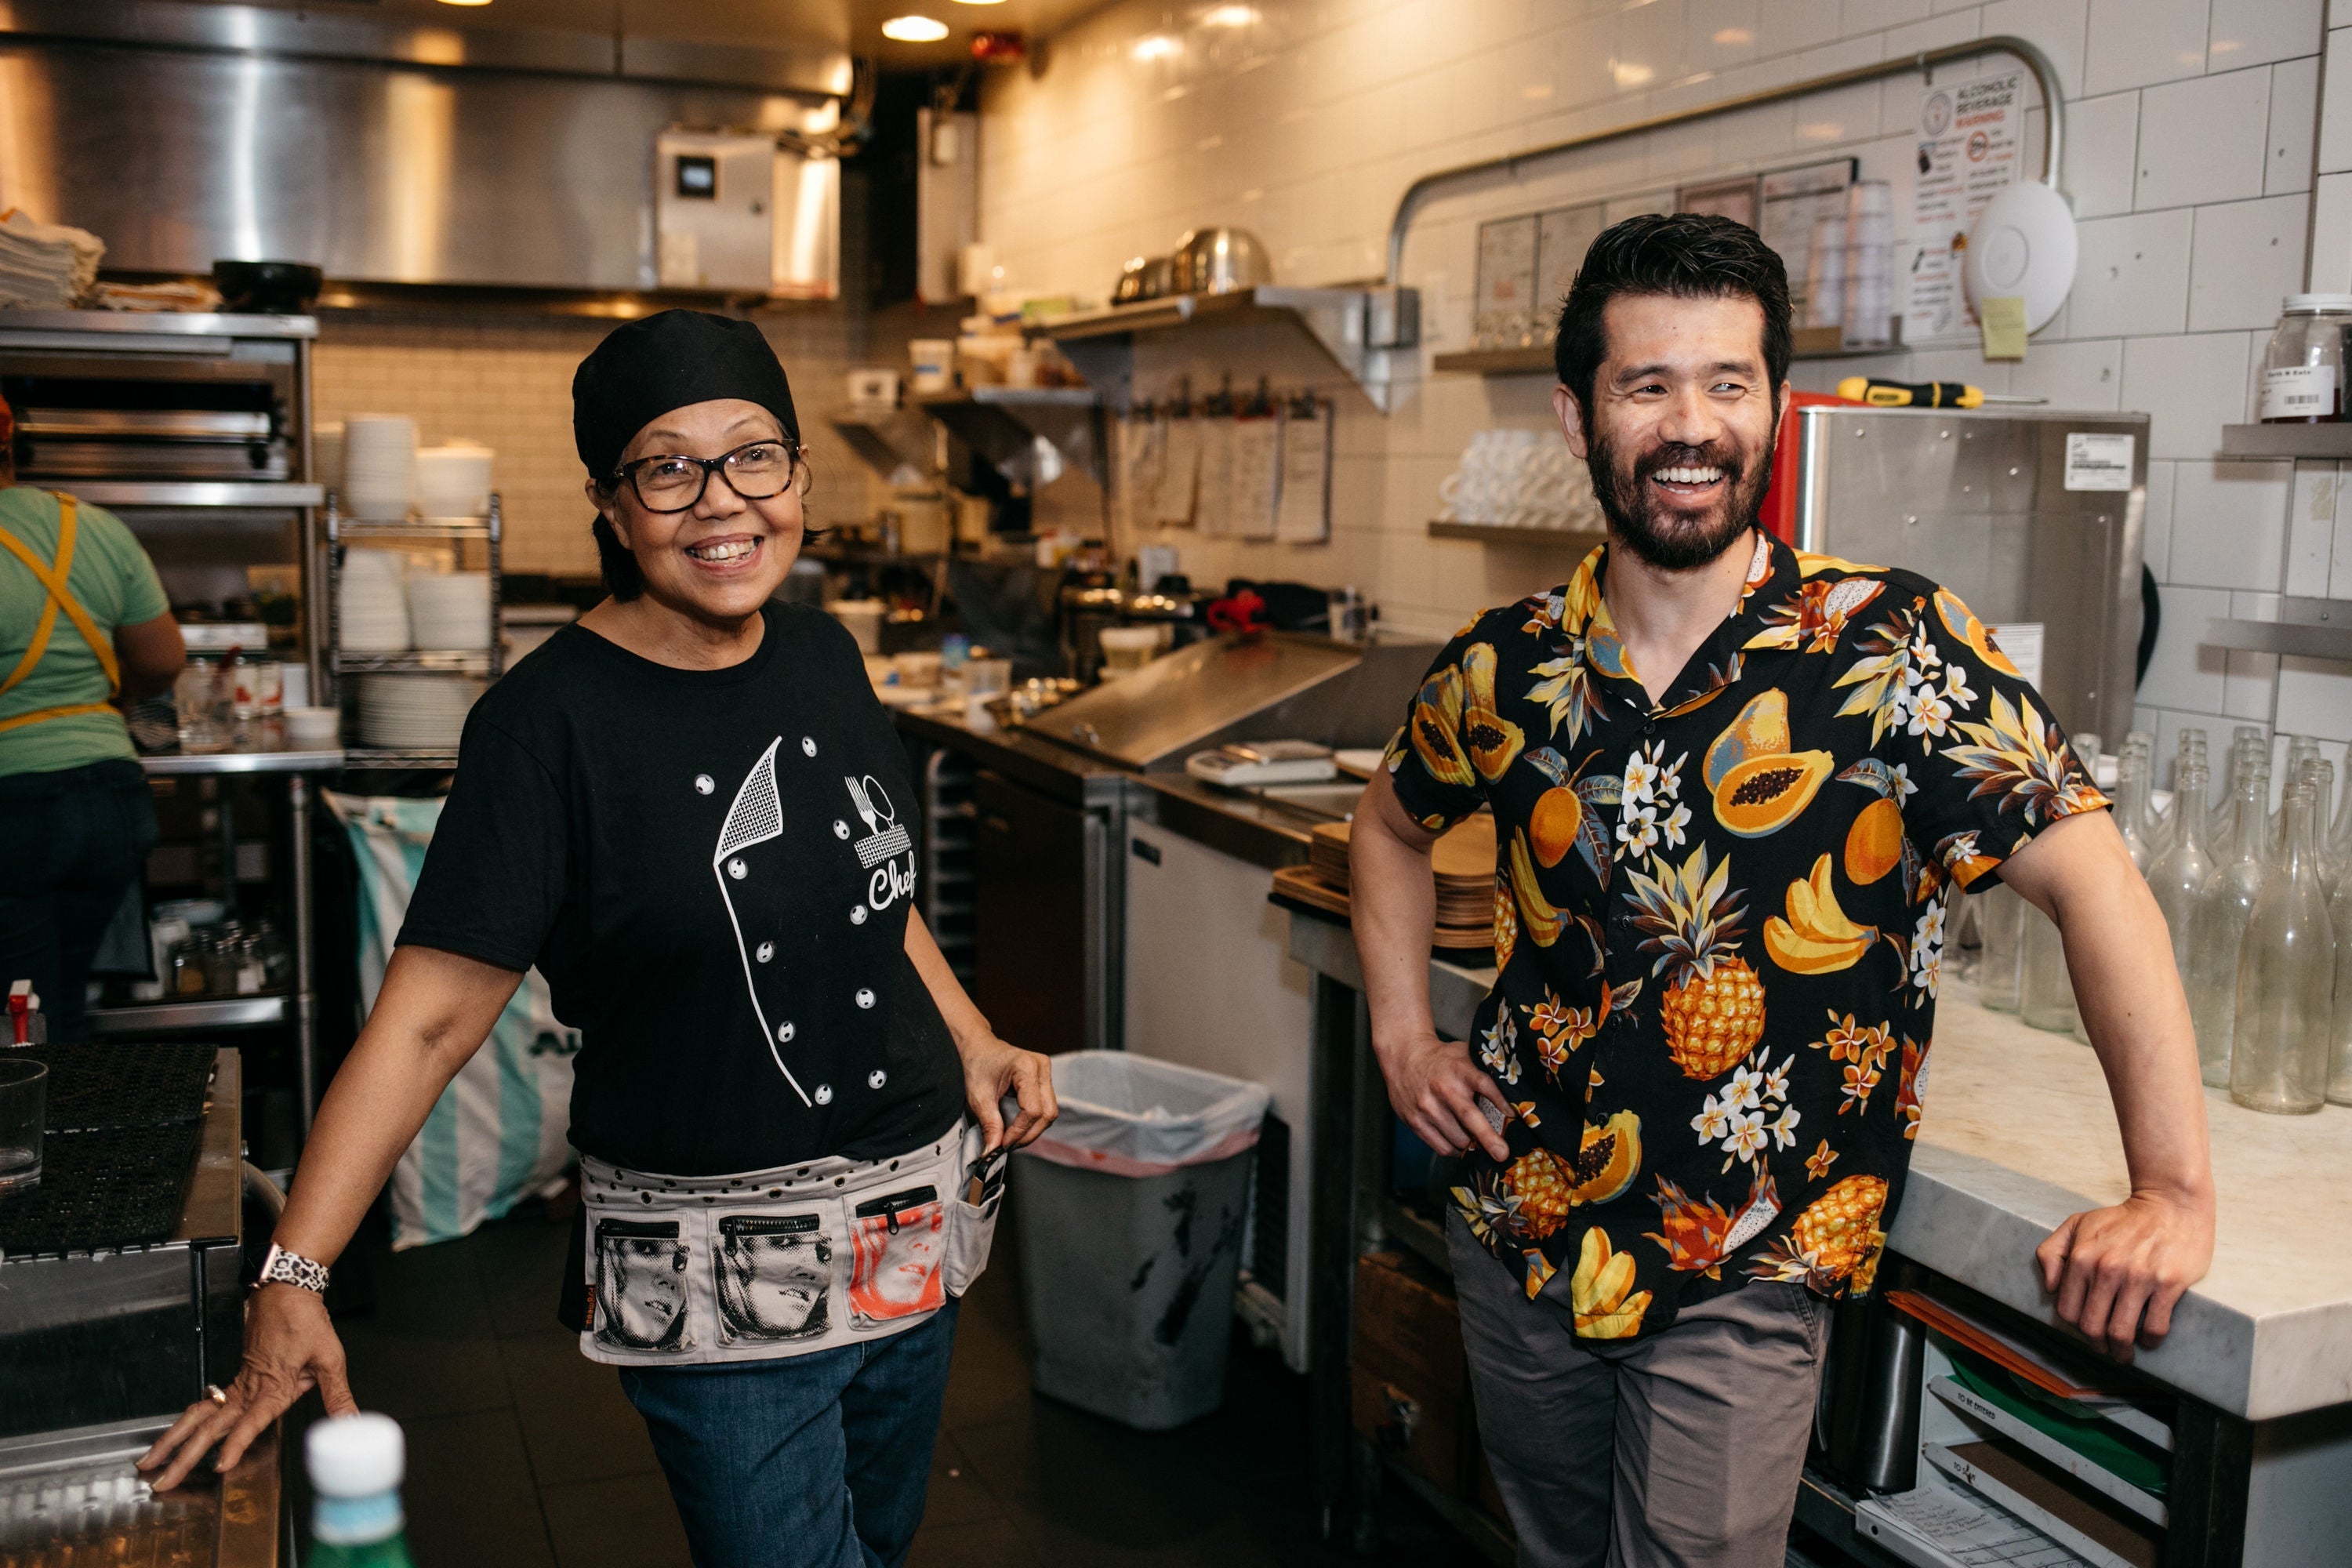 Two people smiling in a restaurant kitchen.